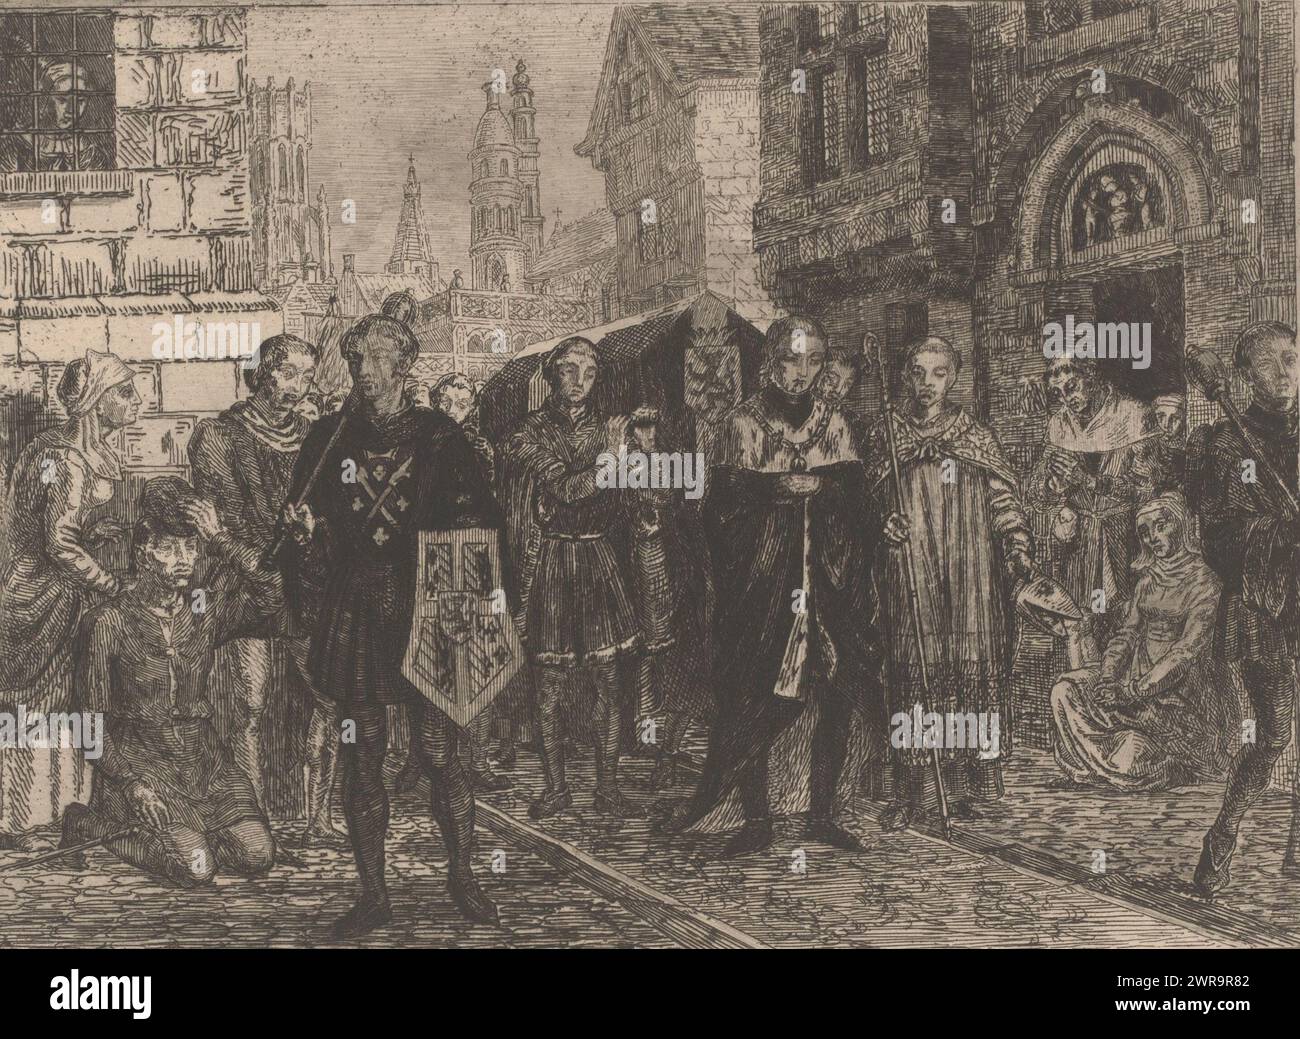 Royal funeral procession, print maker: Edgar Alfred Baes, (signed by artist), 1847 - 1909, paper, etching, drypoint, height 182 mm × width 252 mm, print Stock Photo